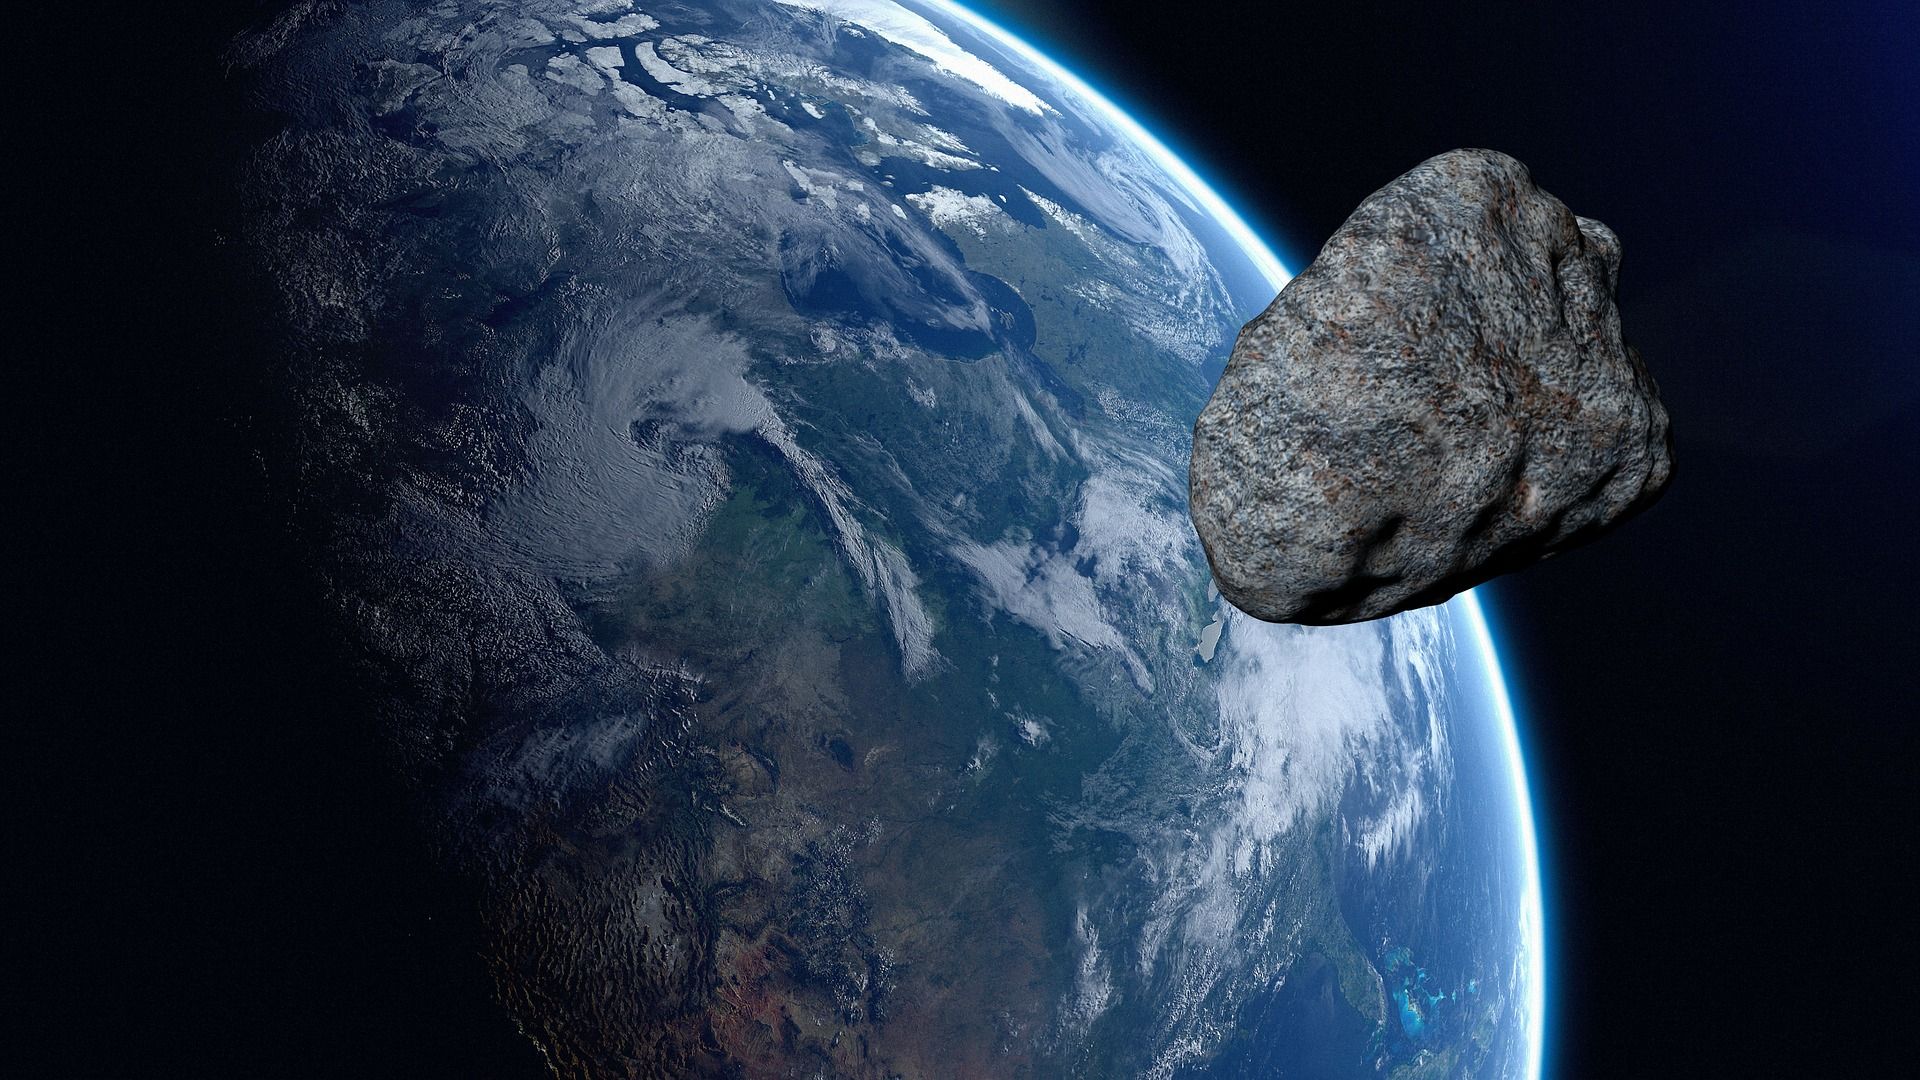 A massive asteroid approaches Earth.